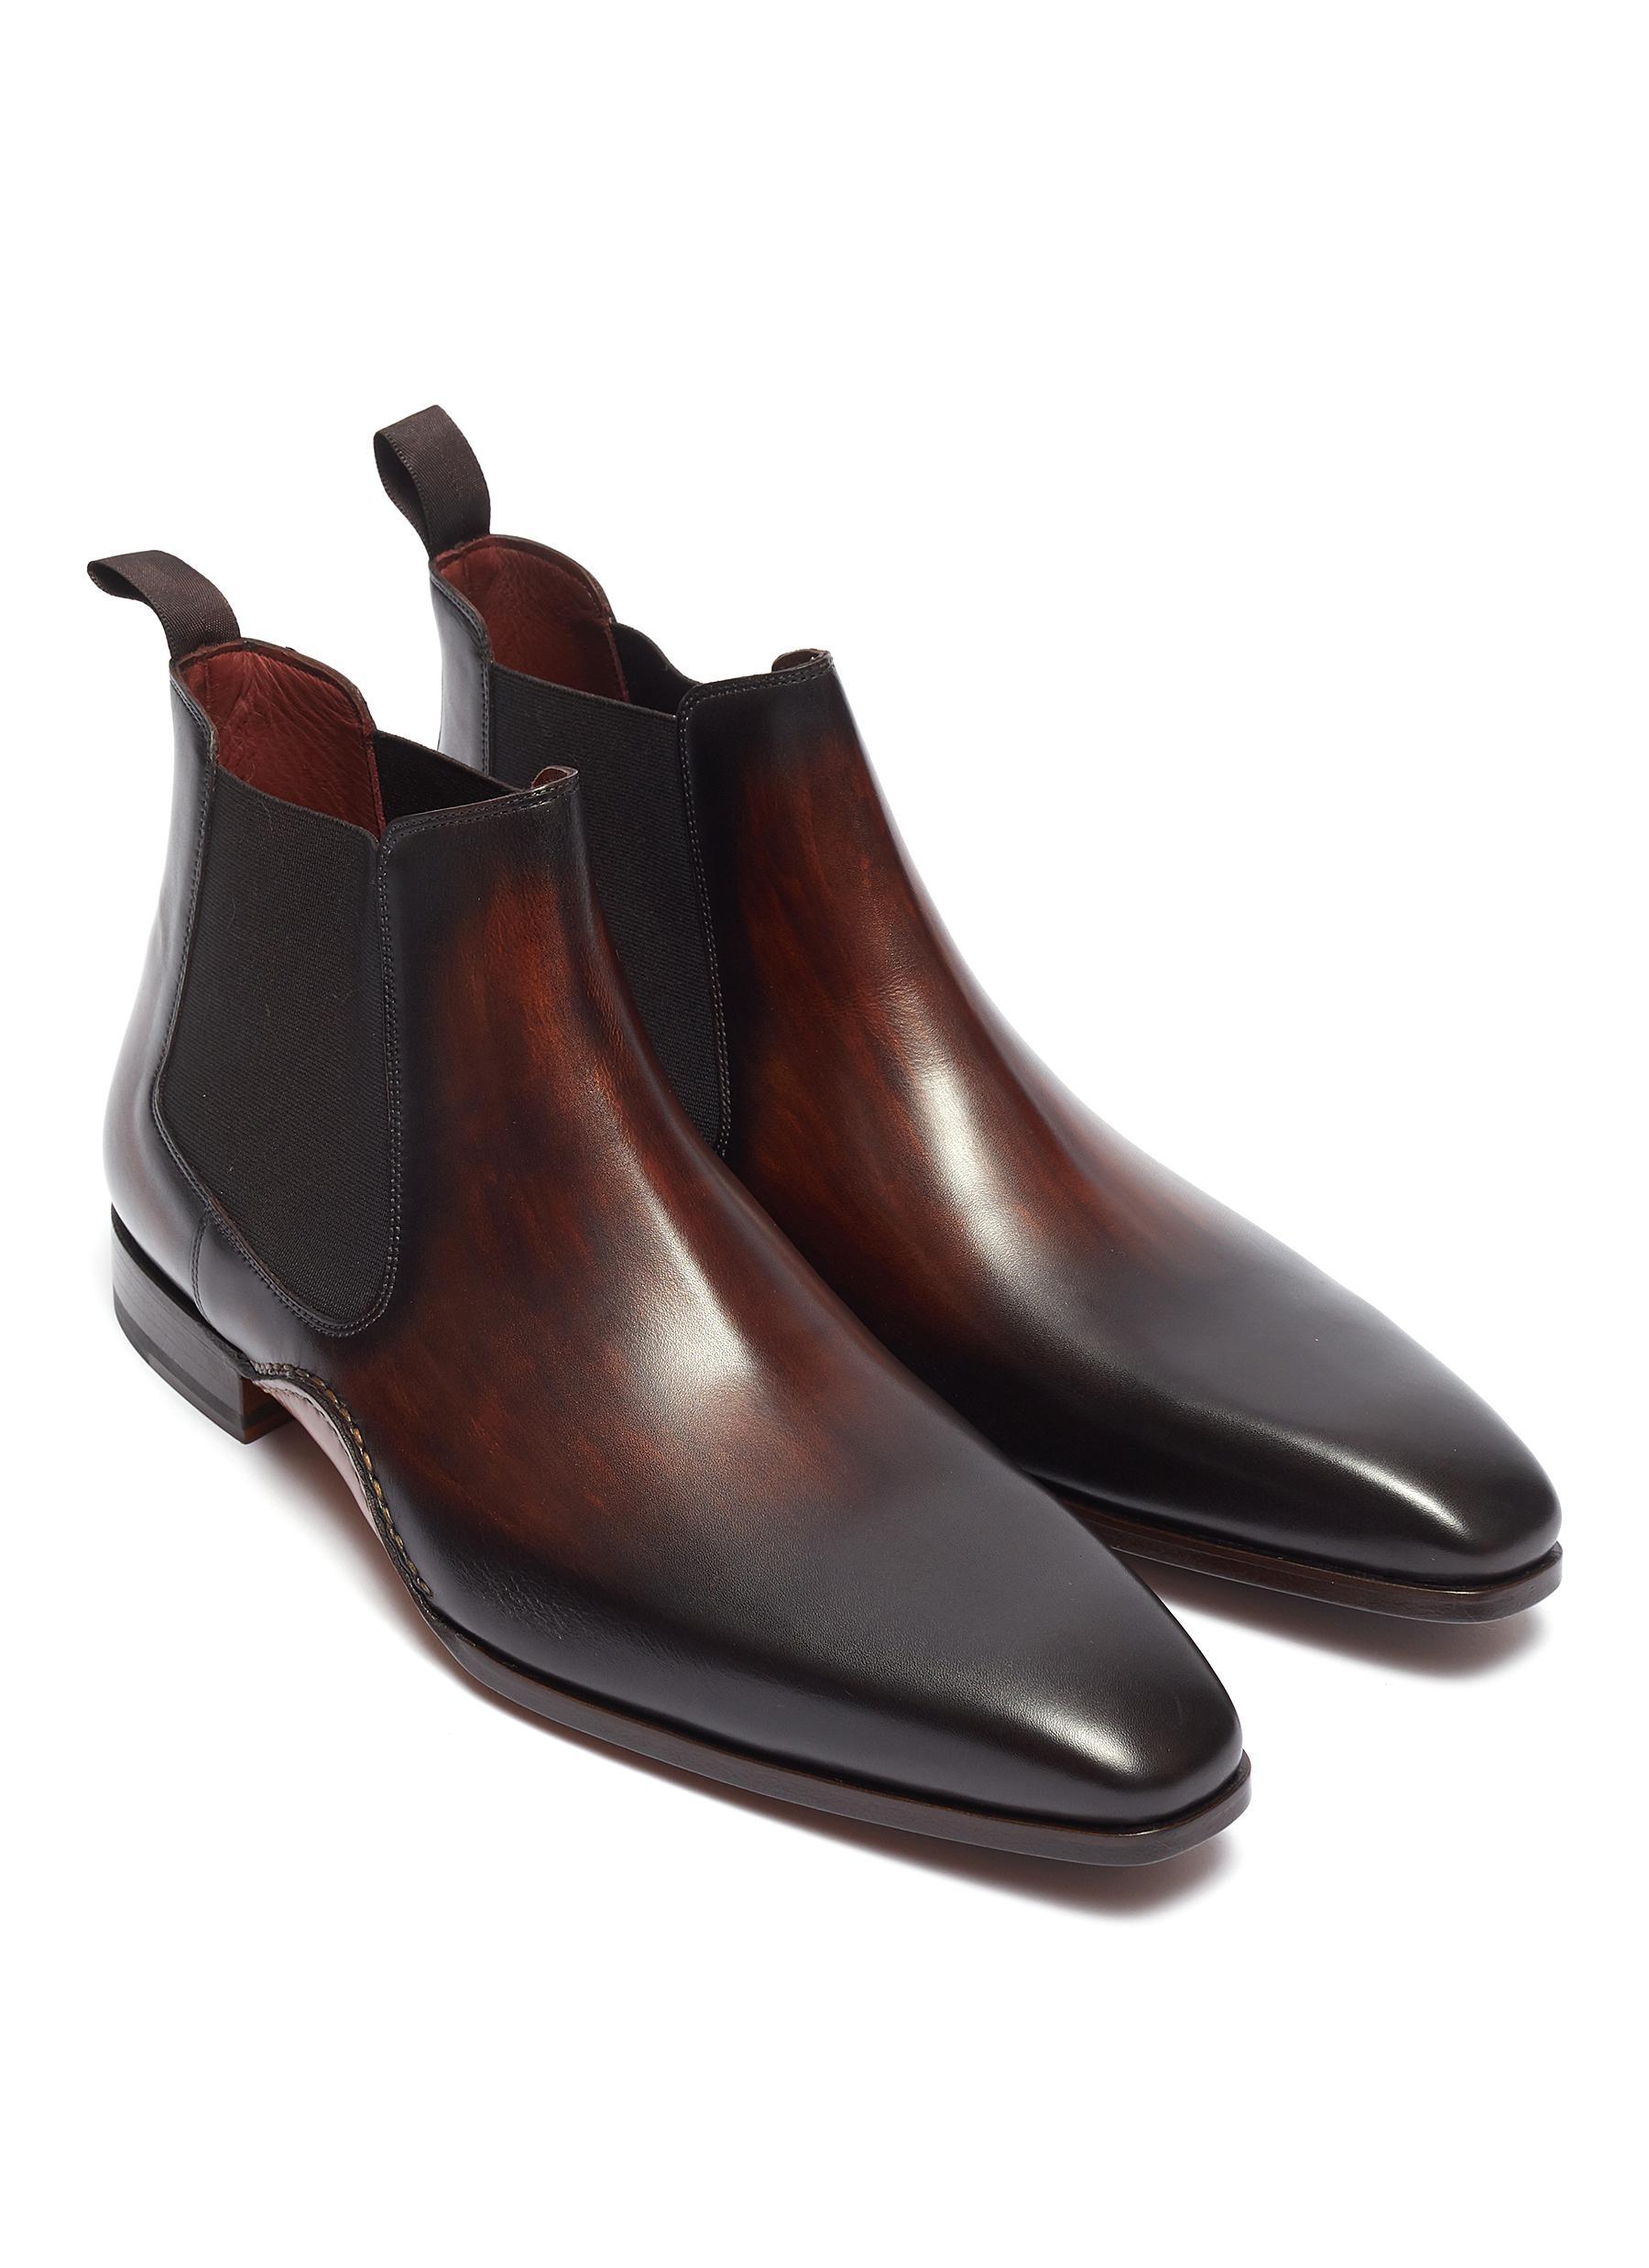 Magnanni Stitched Leather Chelsea Boots in Brown for Men - Lyst